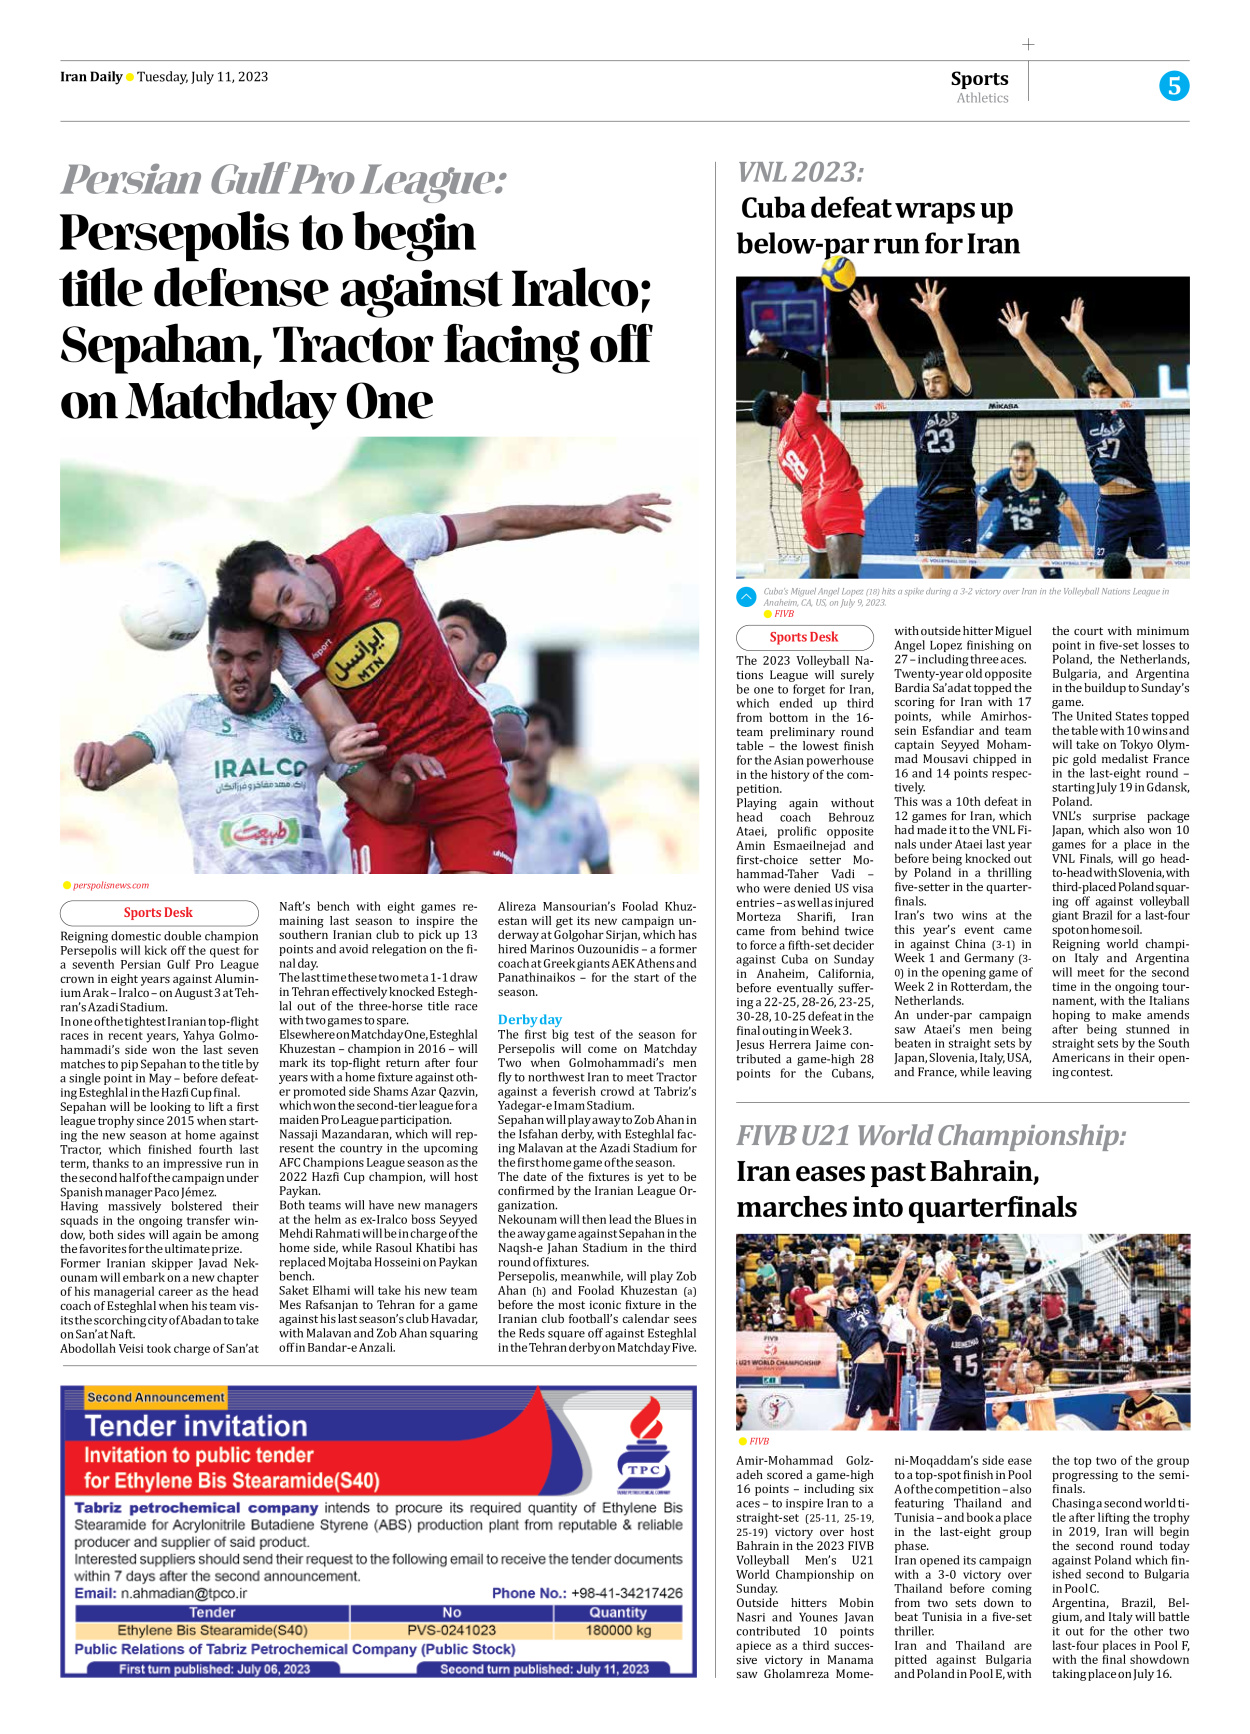 Iran Daily - Number Seven Thousand Three Hundred and Thirty Six - 11 July 2023 - Page 5